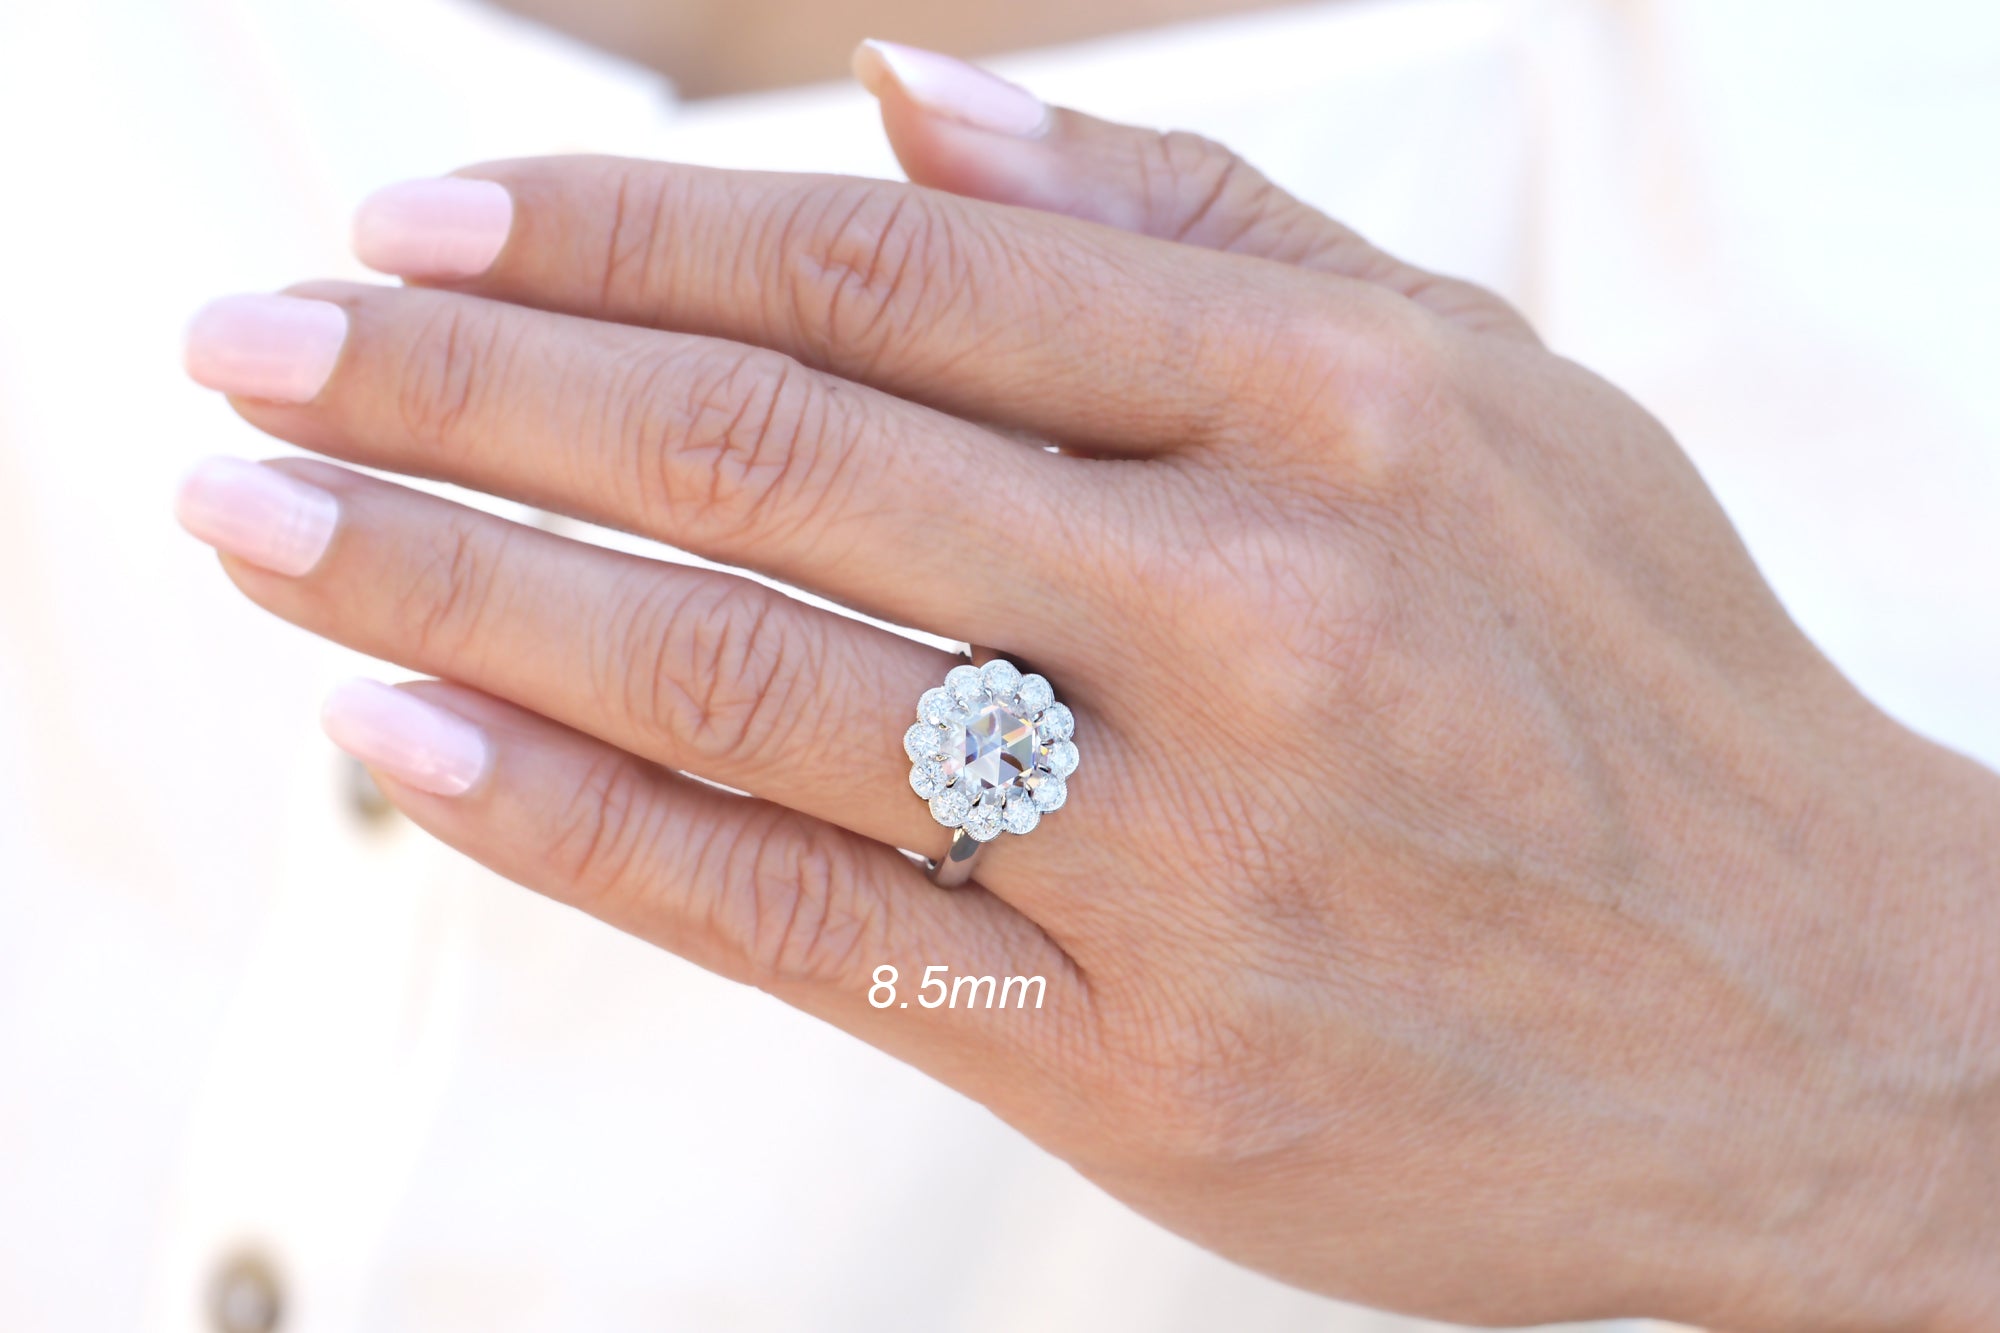 The Catherine Rose cut Moissanite